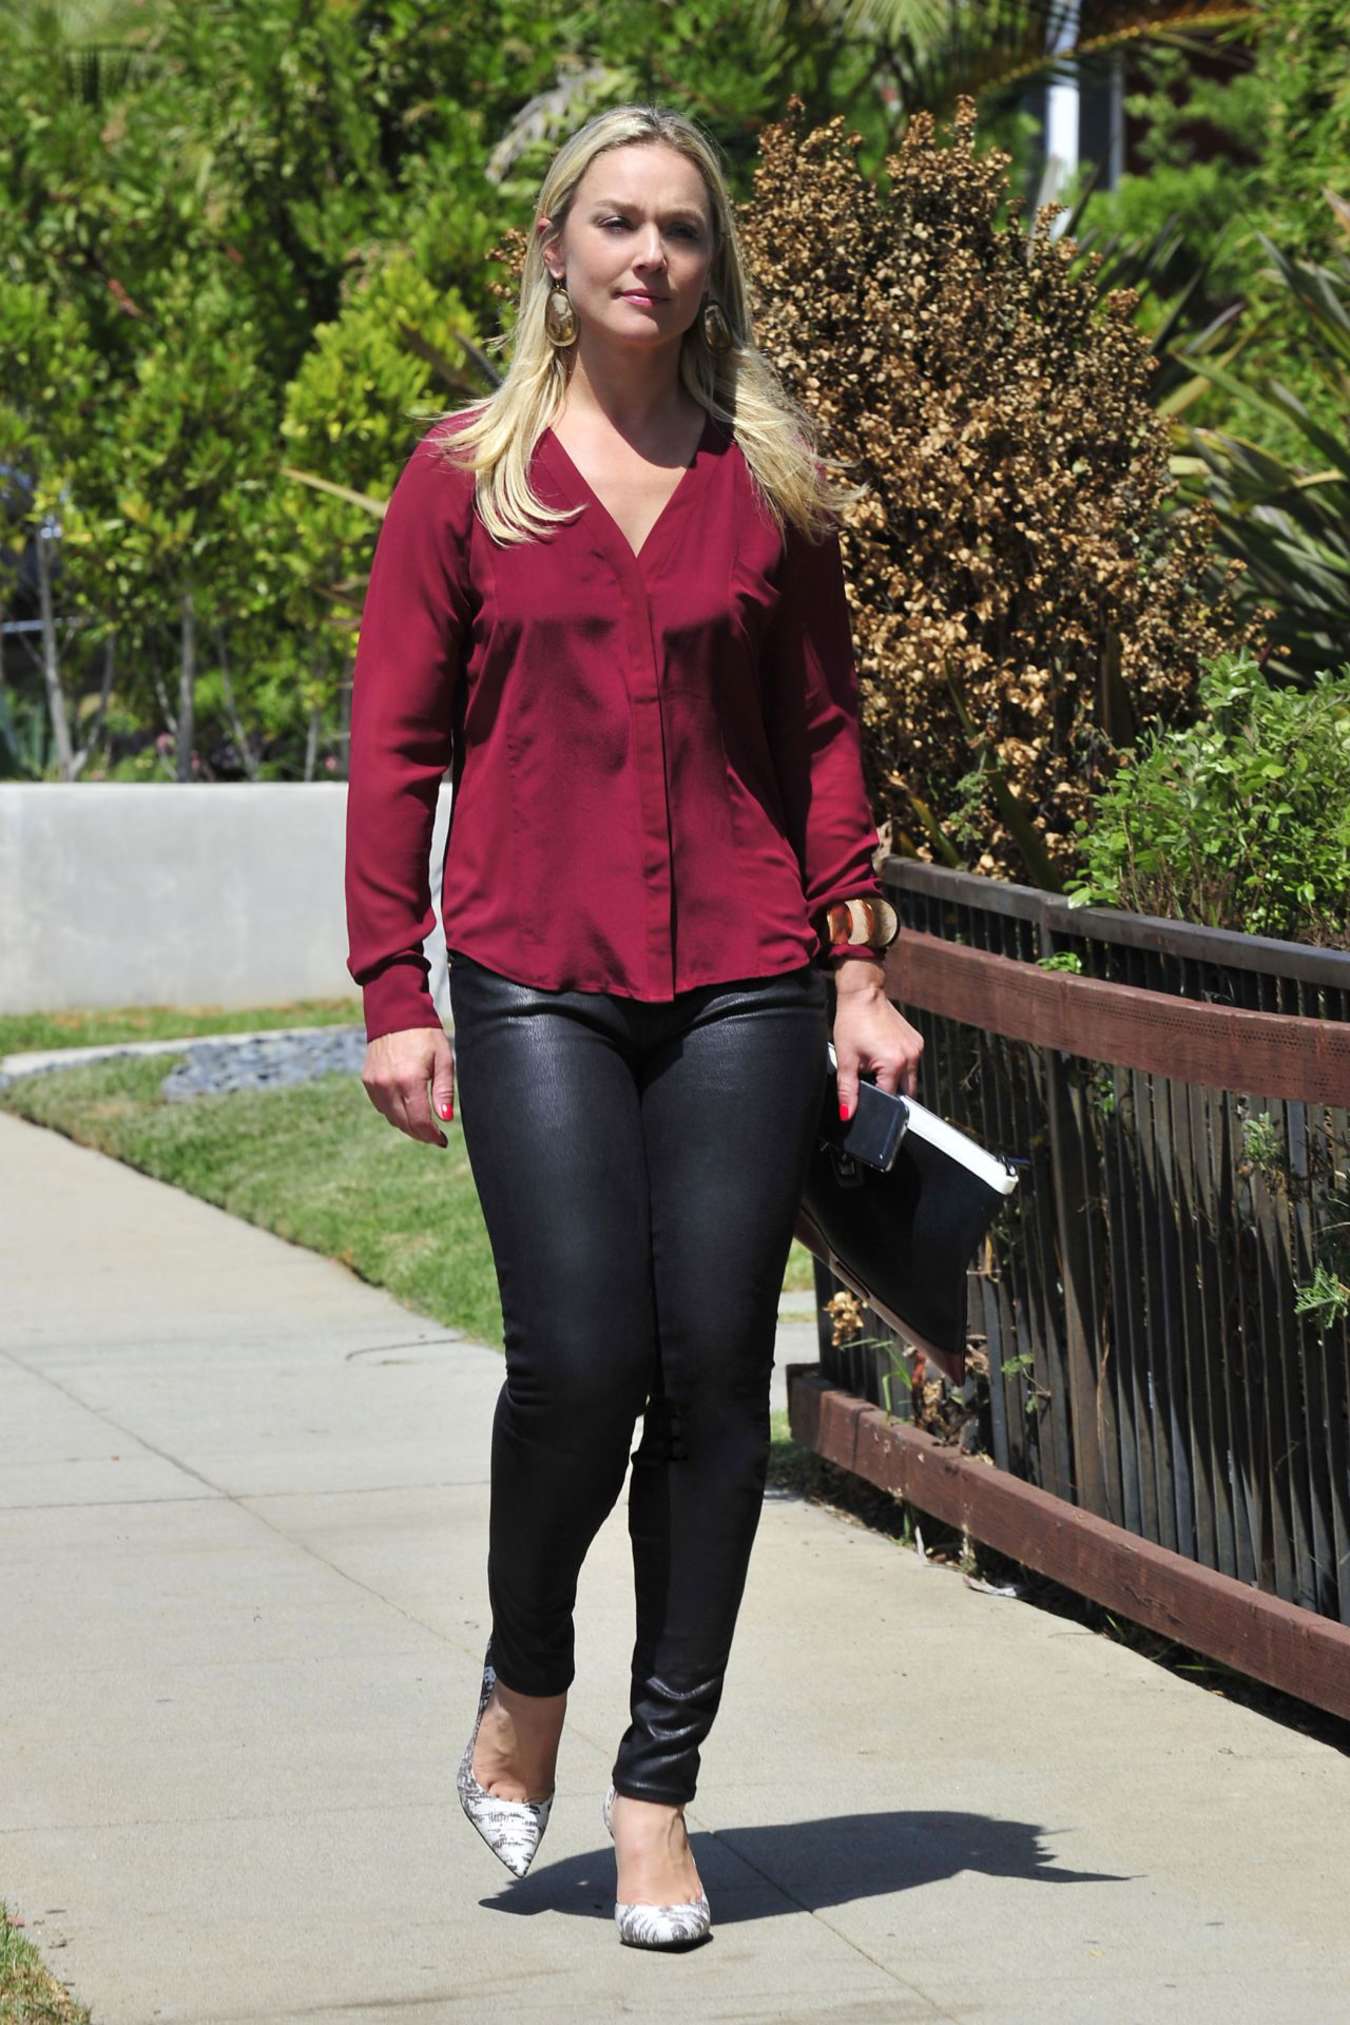 Elisabeth Rohm in Leather Pants Out in Santa Monica. 